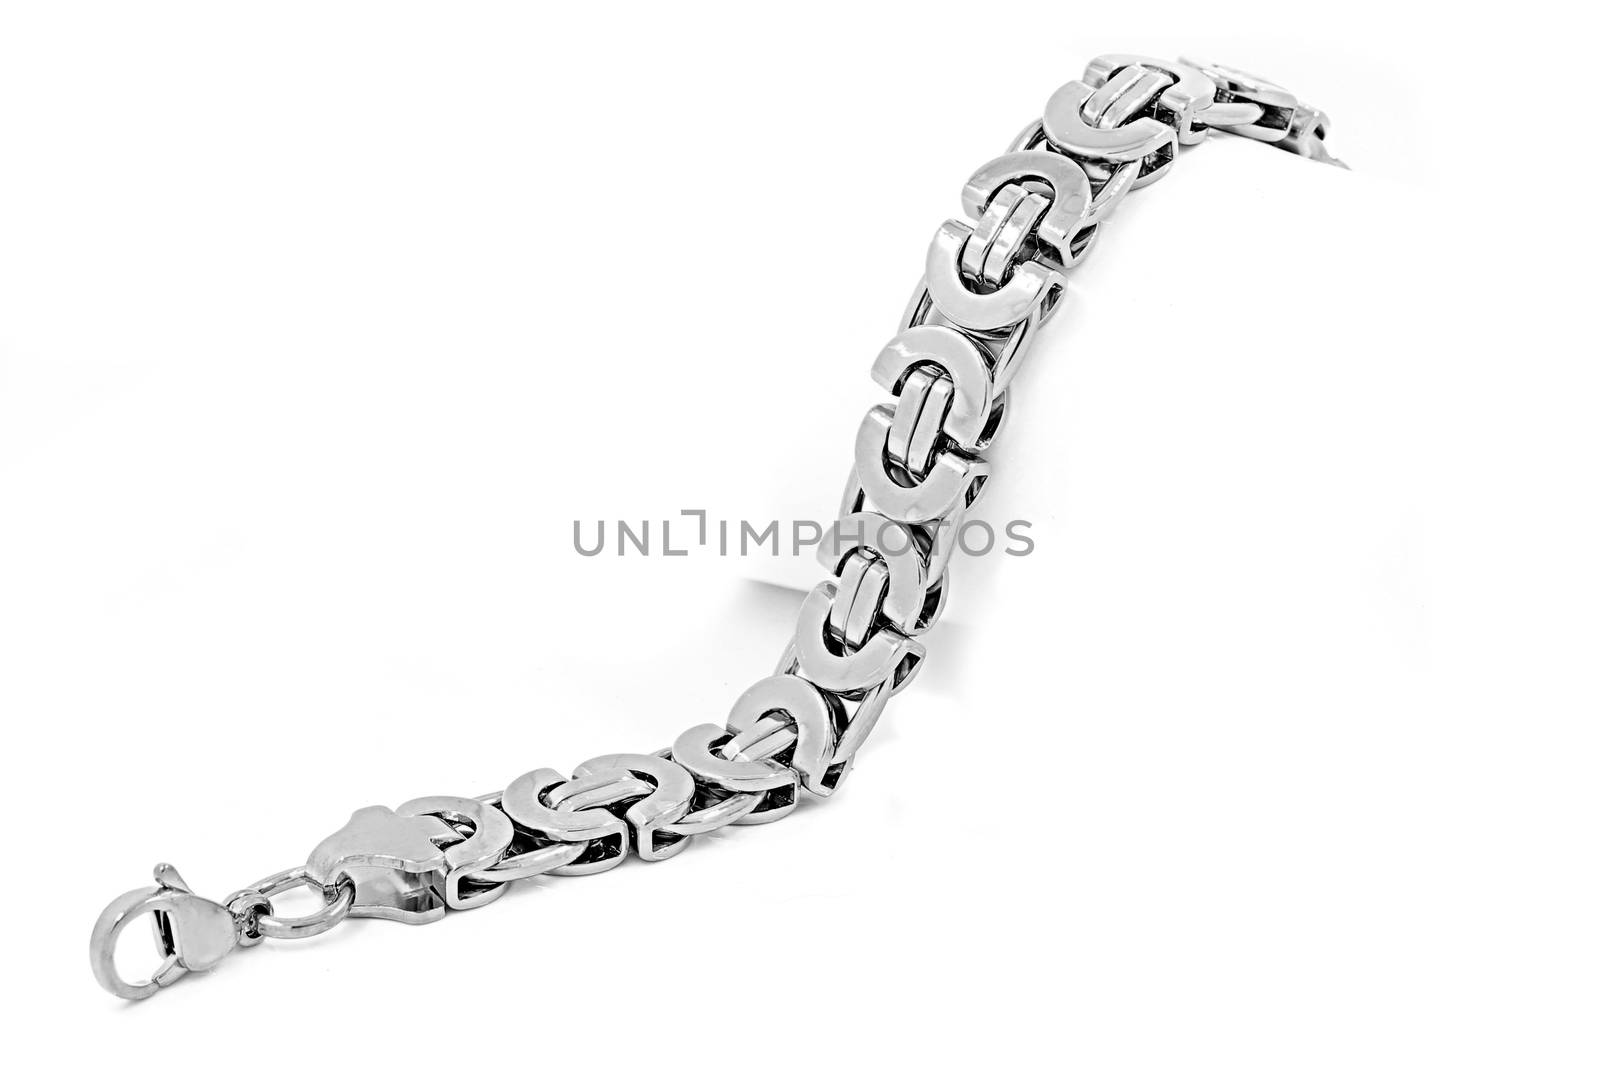 Stainless steel bracelet on a white background